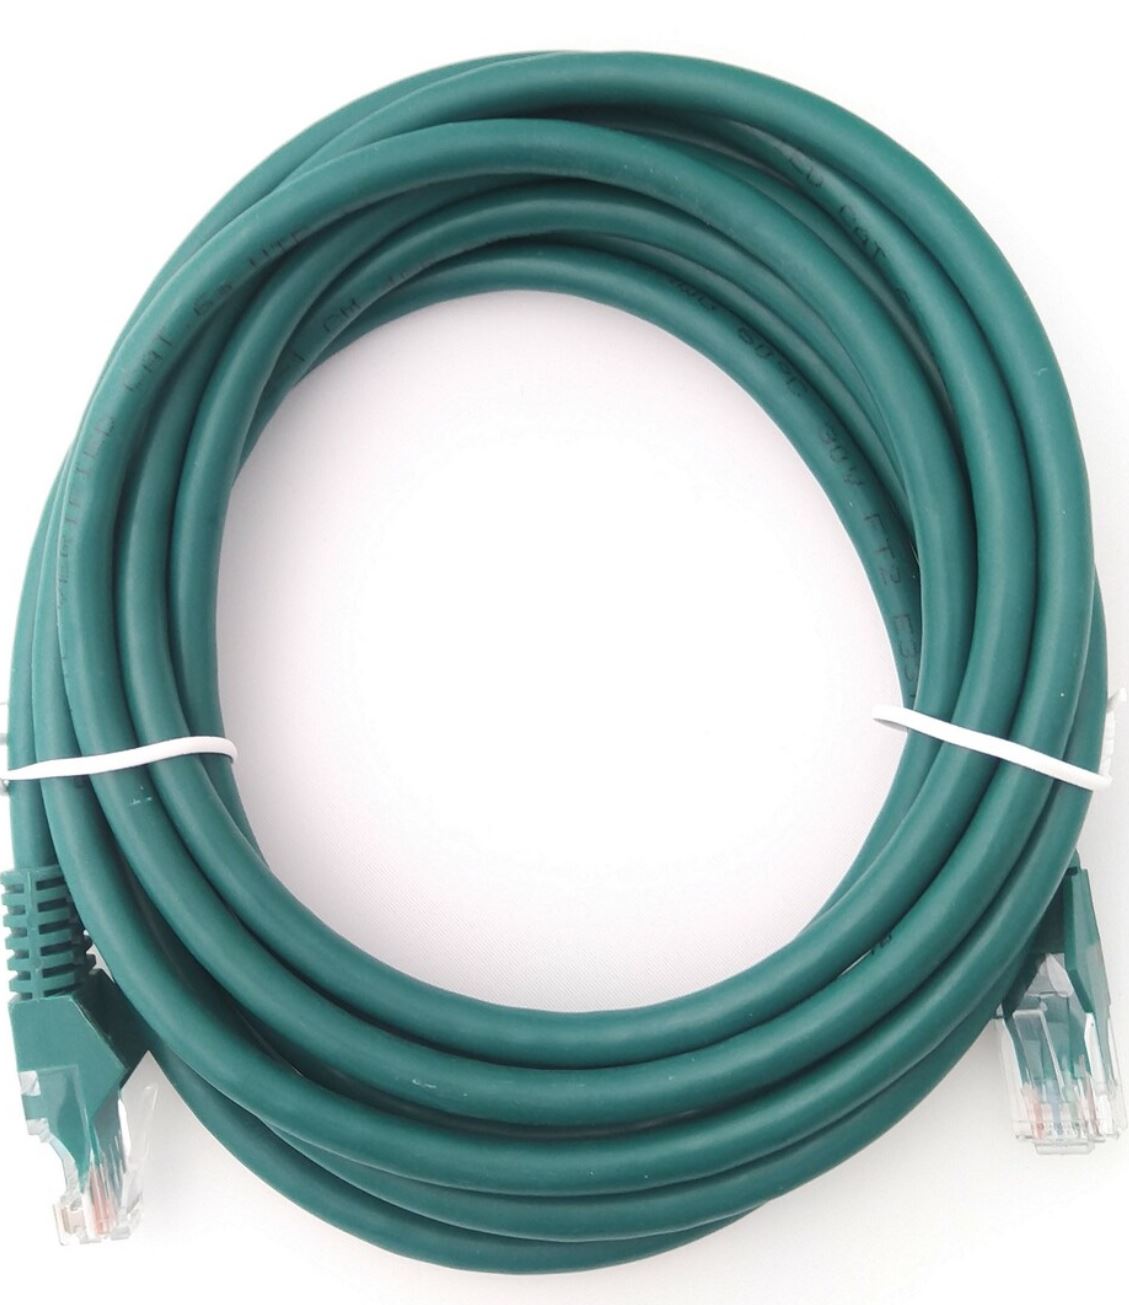 1m UTP Ethernet Cable (Green, Cat 6A)